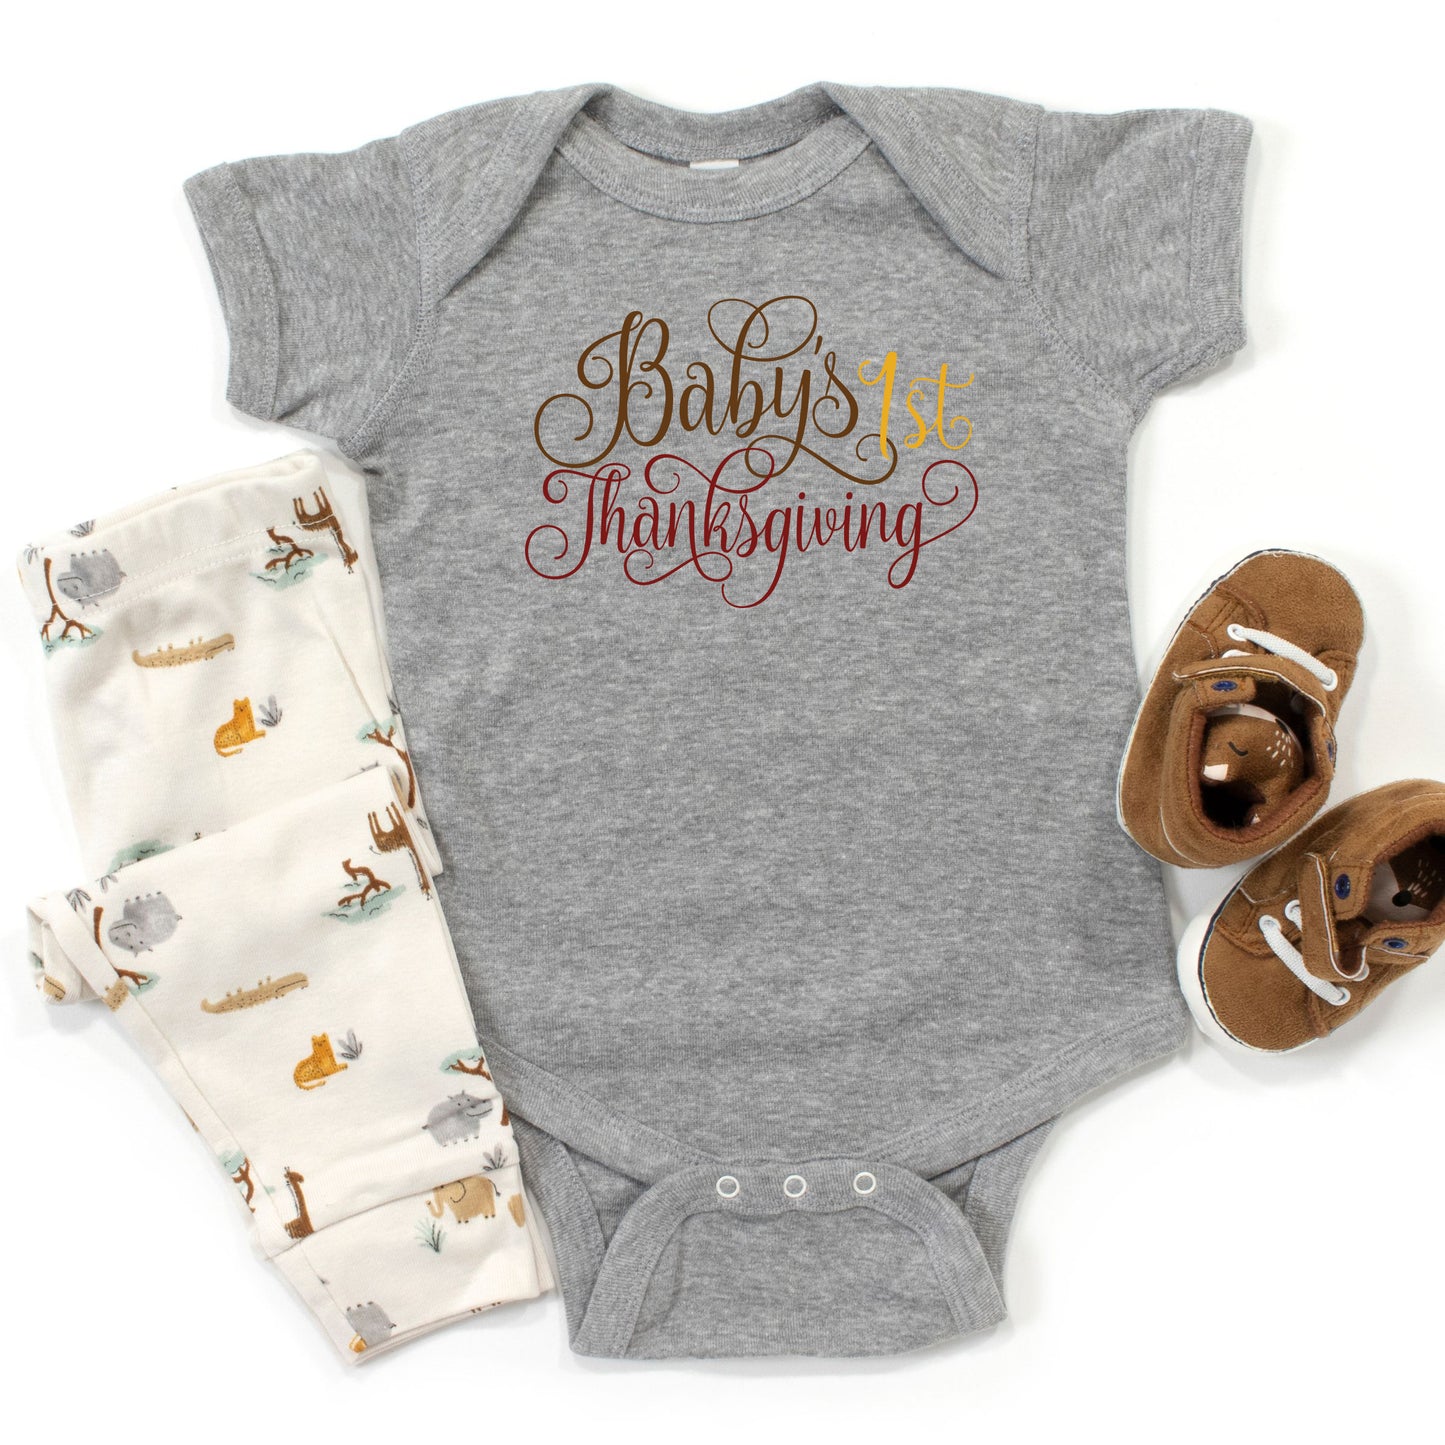 Baby's First 1st Thanksgiving Bodysuit, Fall Baby Shirt